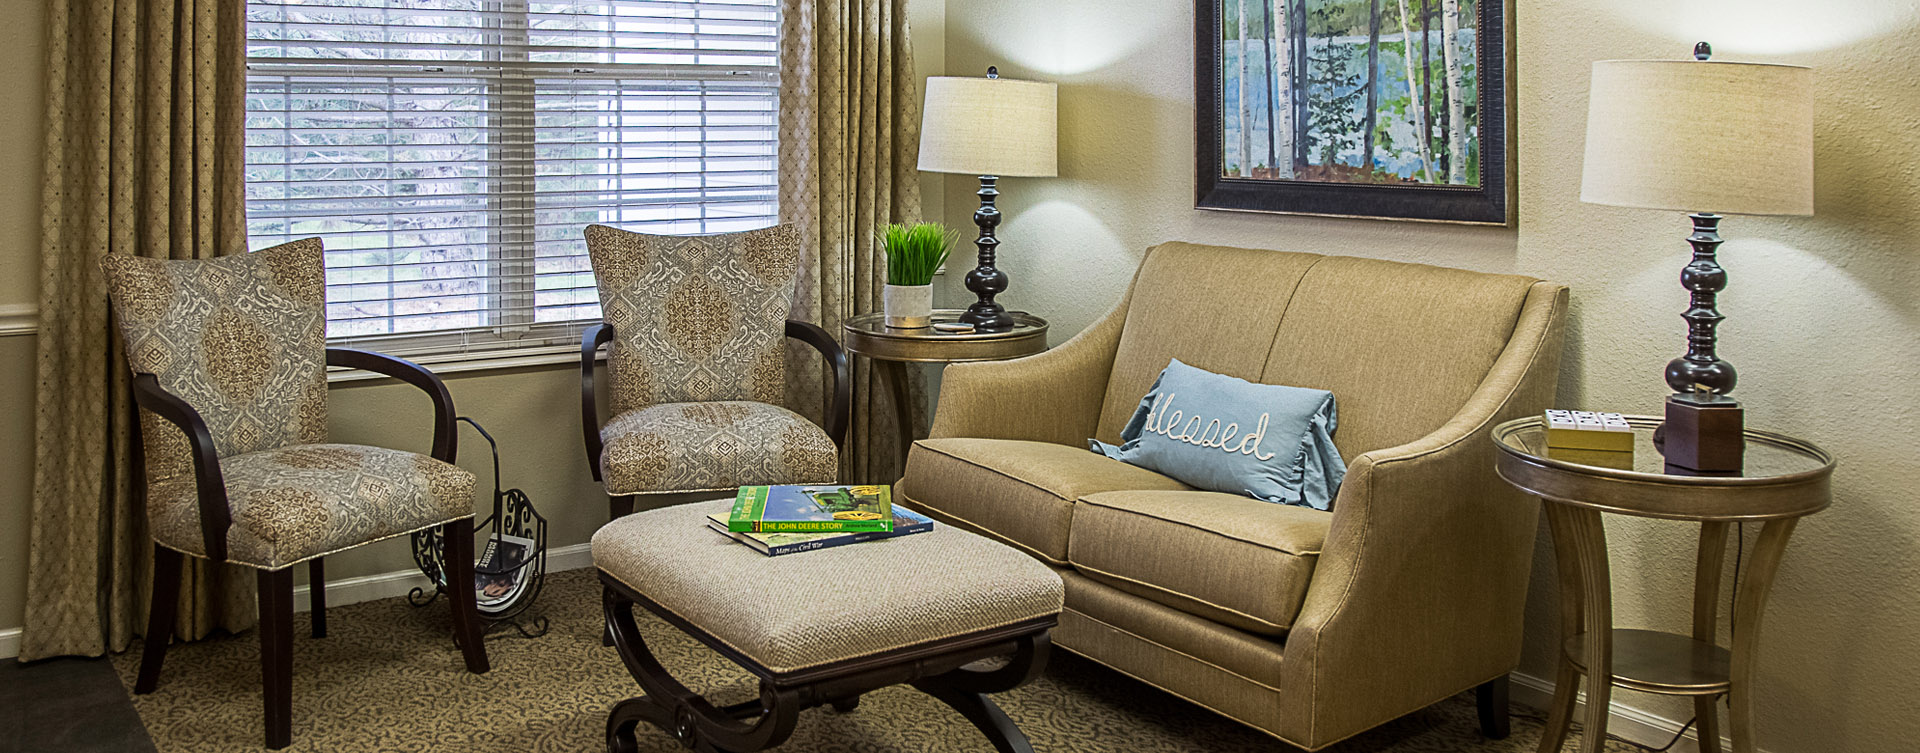 Enjoy a good book in the sitting area at Bickford of Davenport